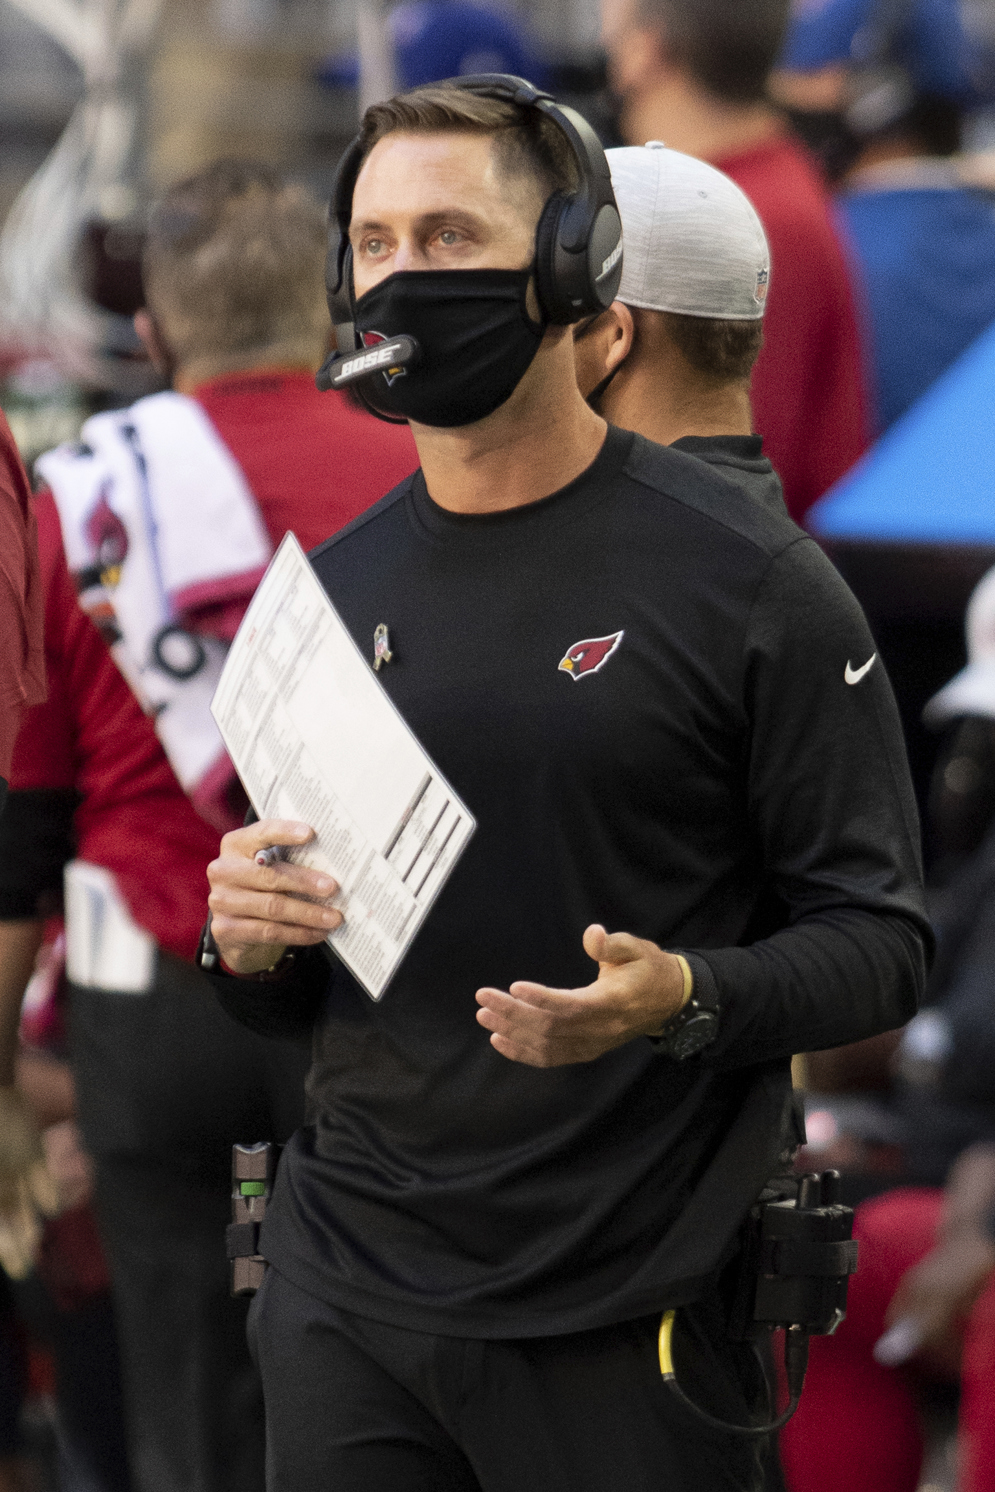 Coach-to-quarterback communications systems replaced hand signals and player substitutions as methods for coaches to relay play calls to quarterbacks. (AP/Jennifer Stewart)